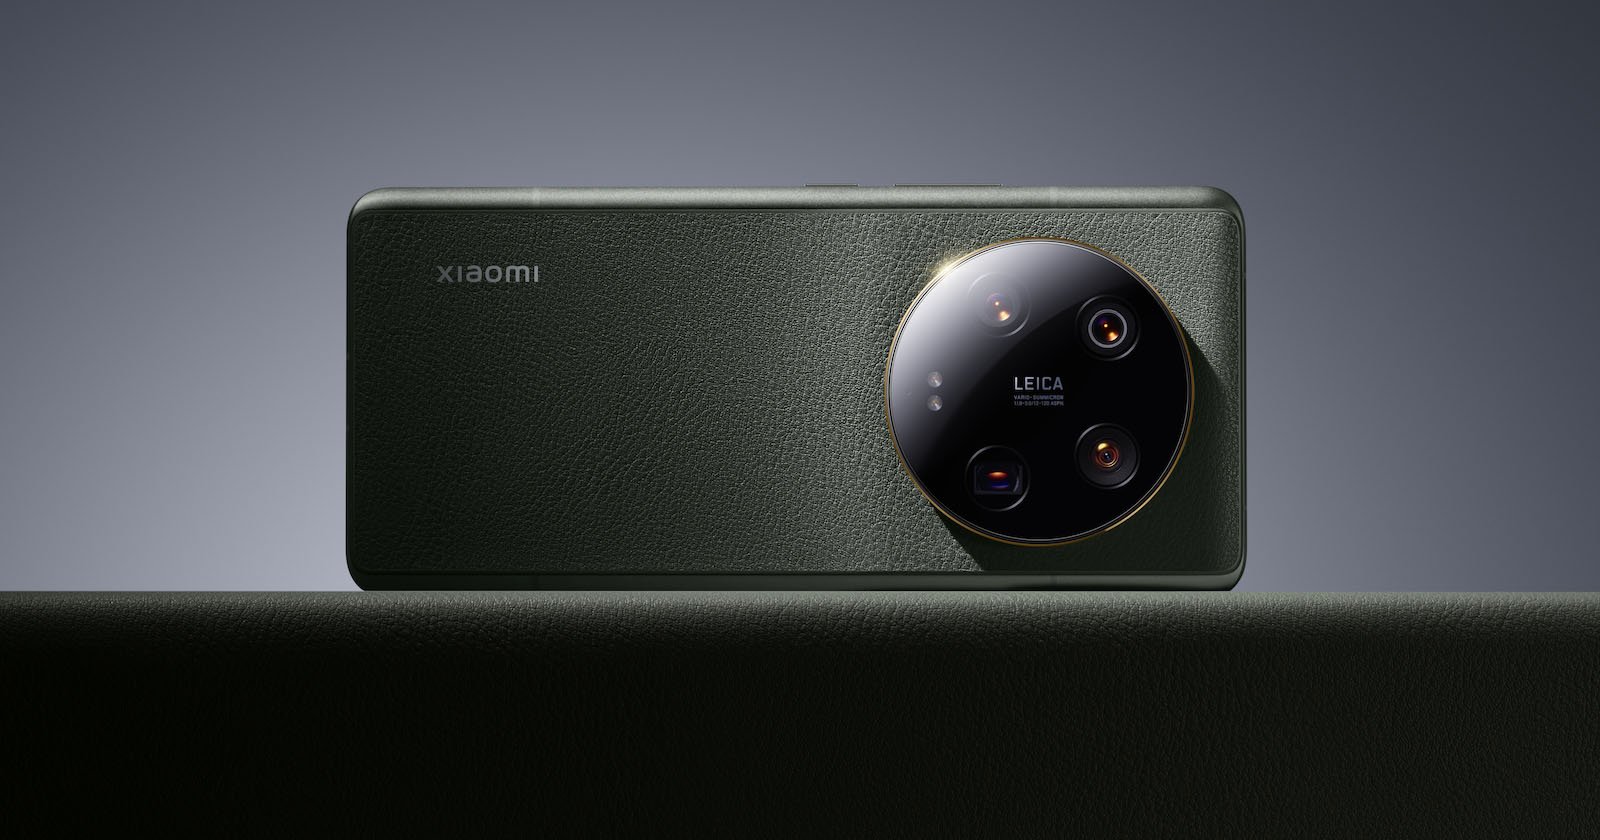 Xiaomi 13 Ultra's Variable Aperture Camera is Supported by Leica Glass